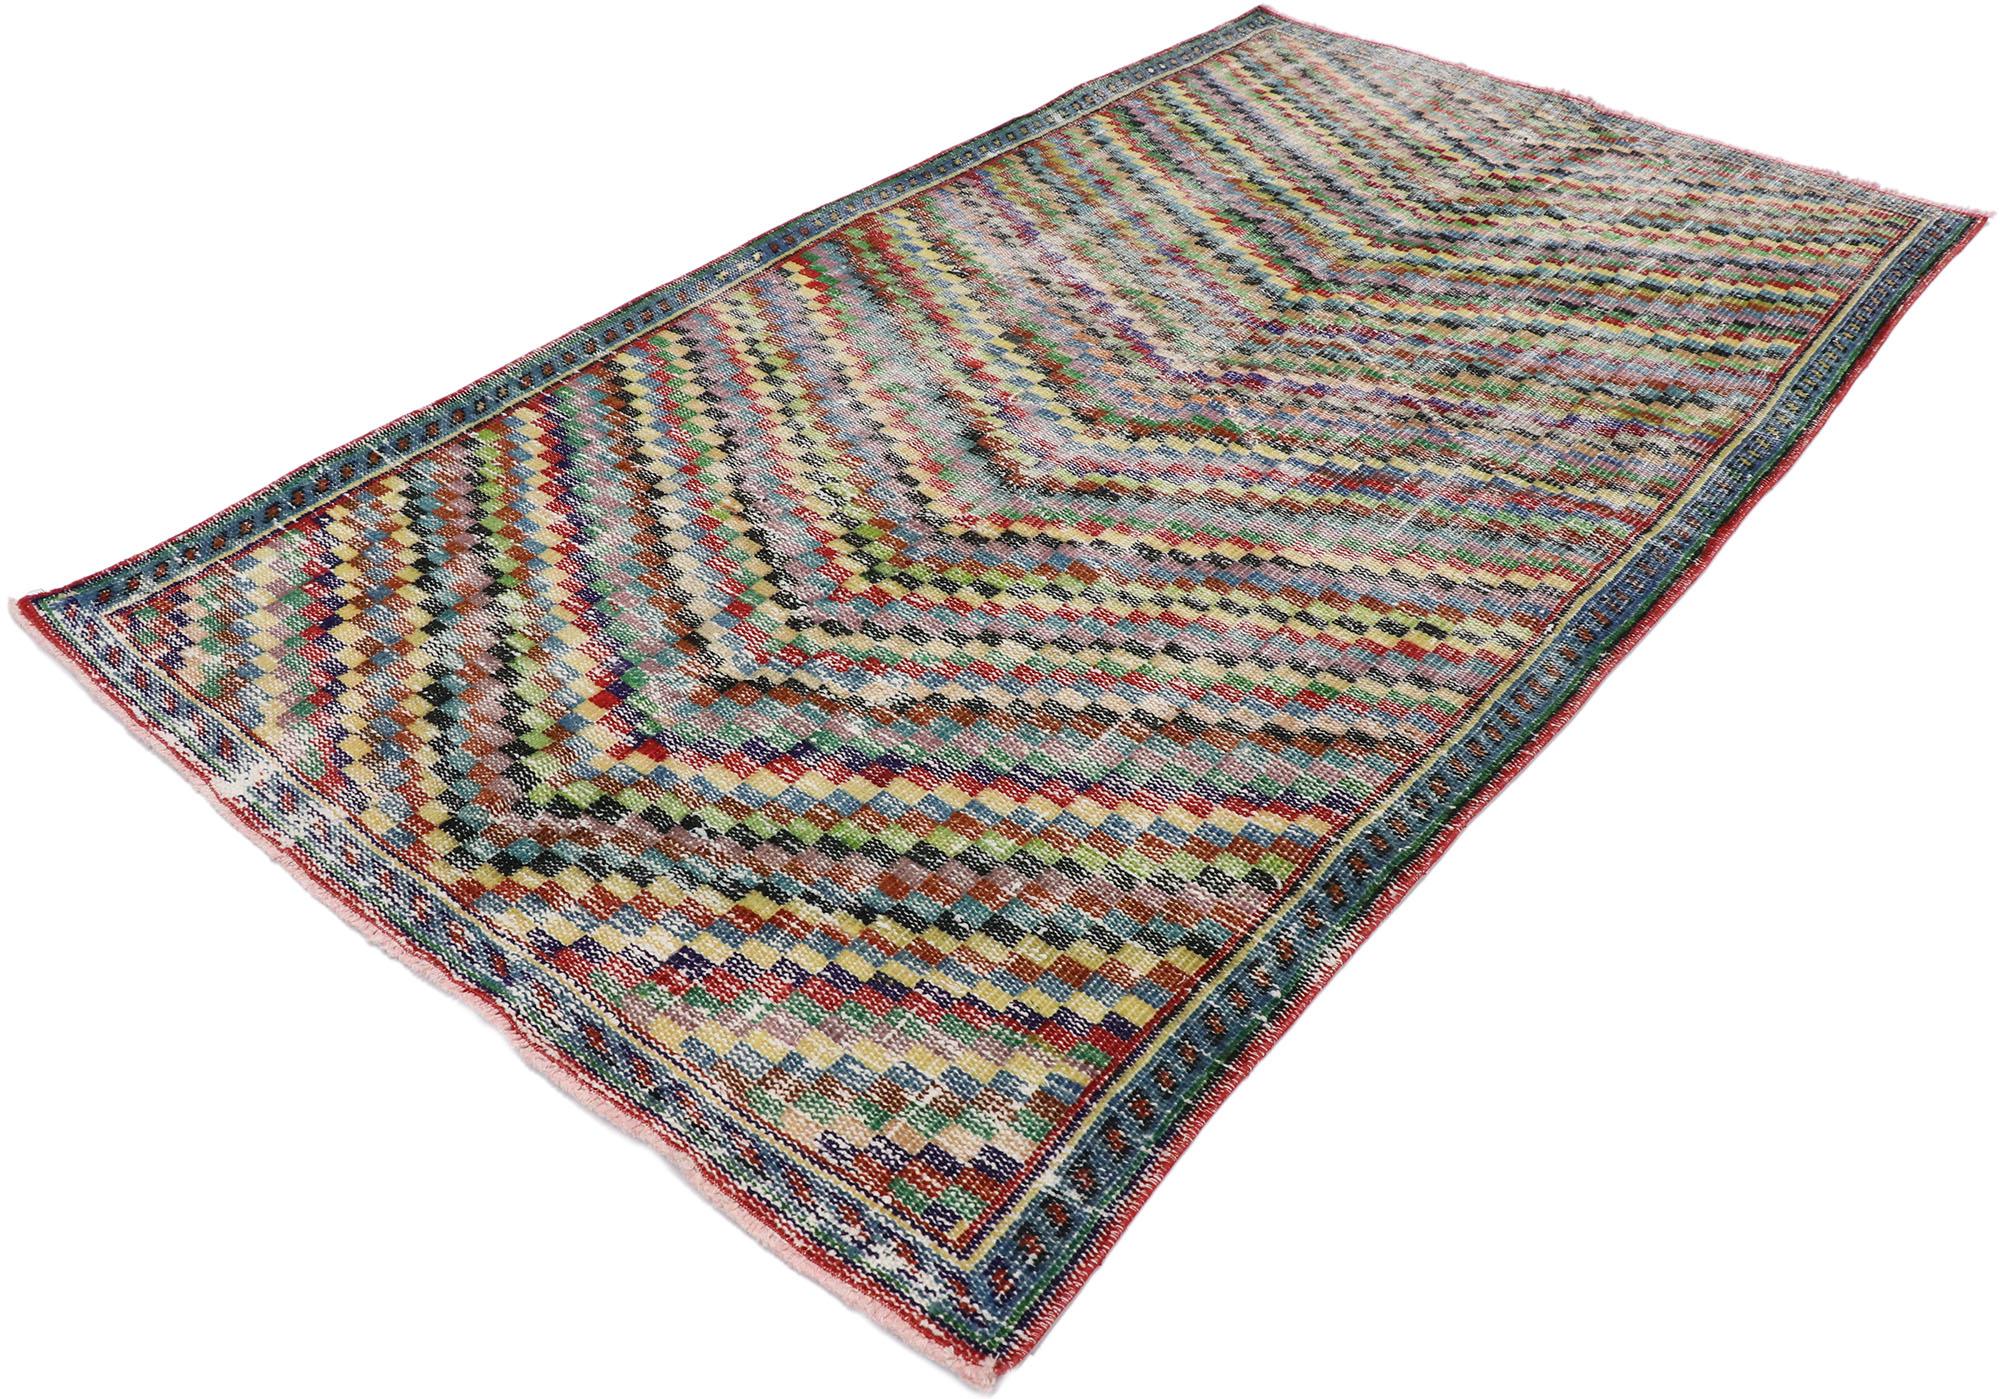 53301, distressed vintage Turkish Sivas rug with Rustic Mid-Century Modern Cubist style. This hand knotted wool distressed vintage Turkish Sivas rug features an all-over checkered chevron pattern comprised of rows of multicolored squares. Each row